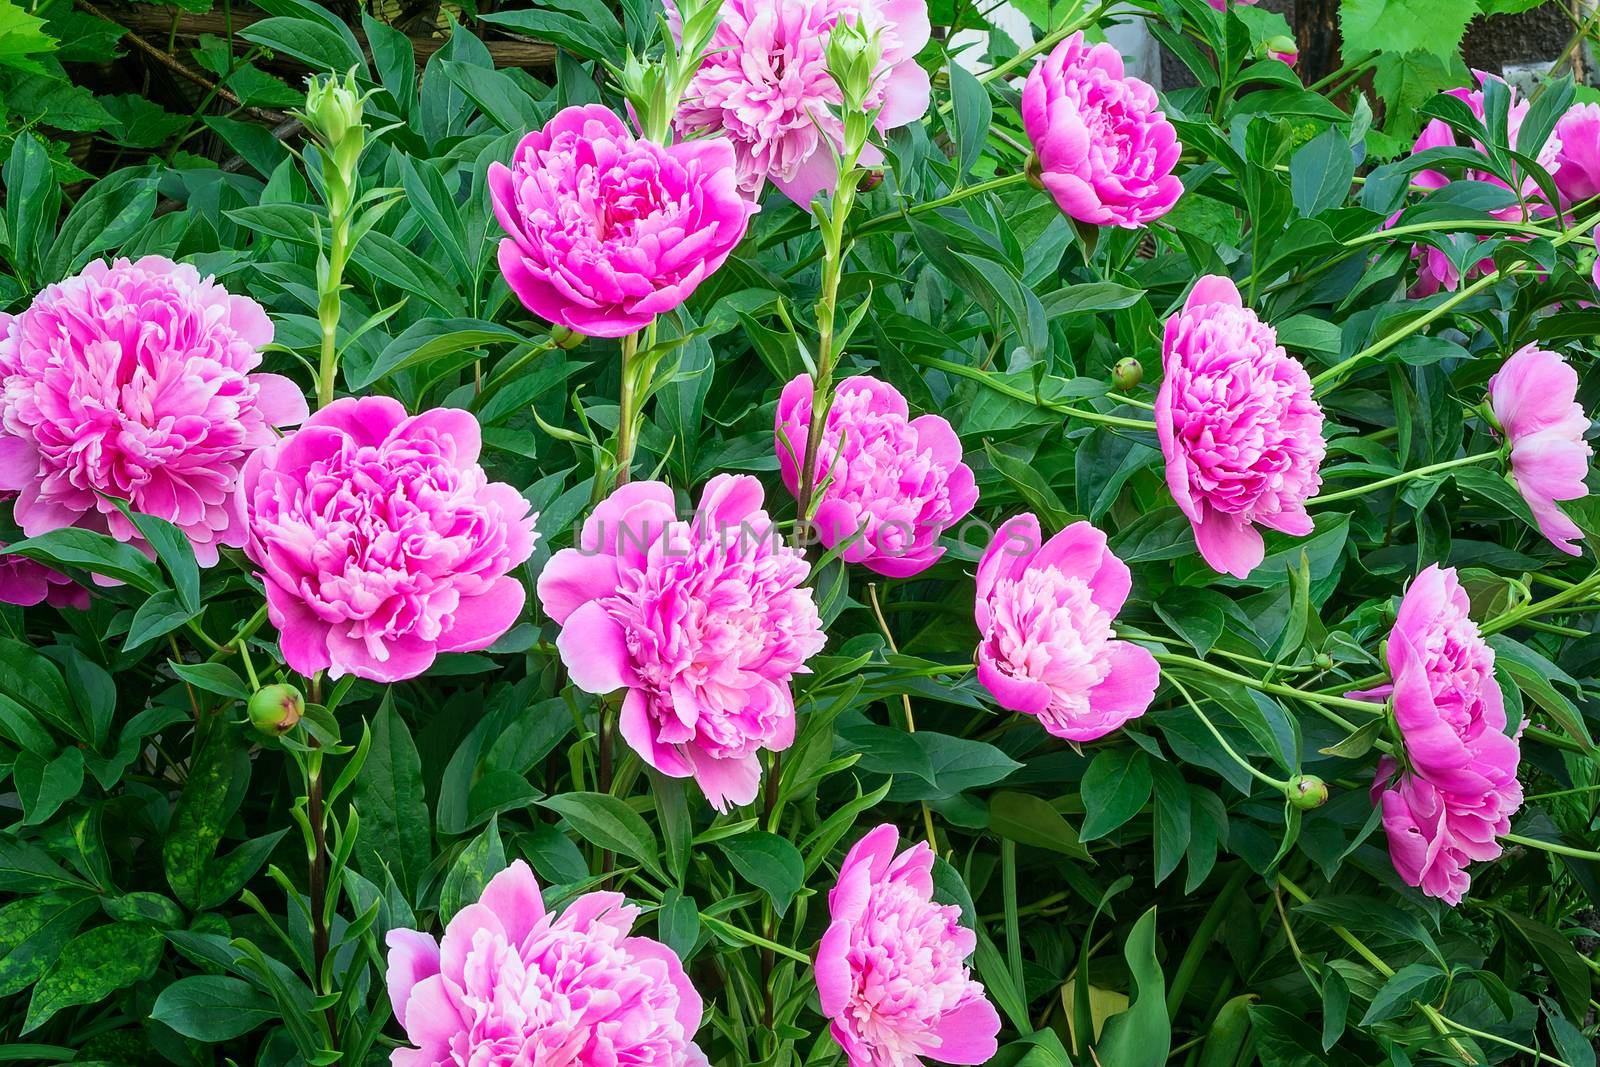 The beautiful pink large peony blossoming in a garden, is photographed by a close up.